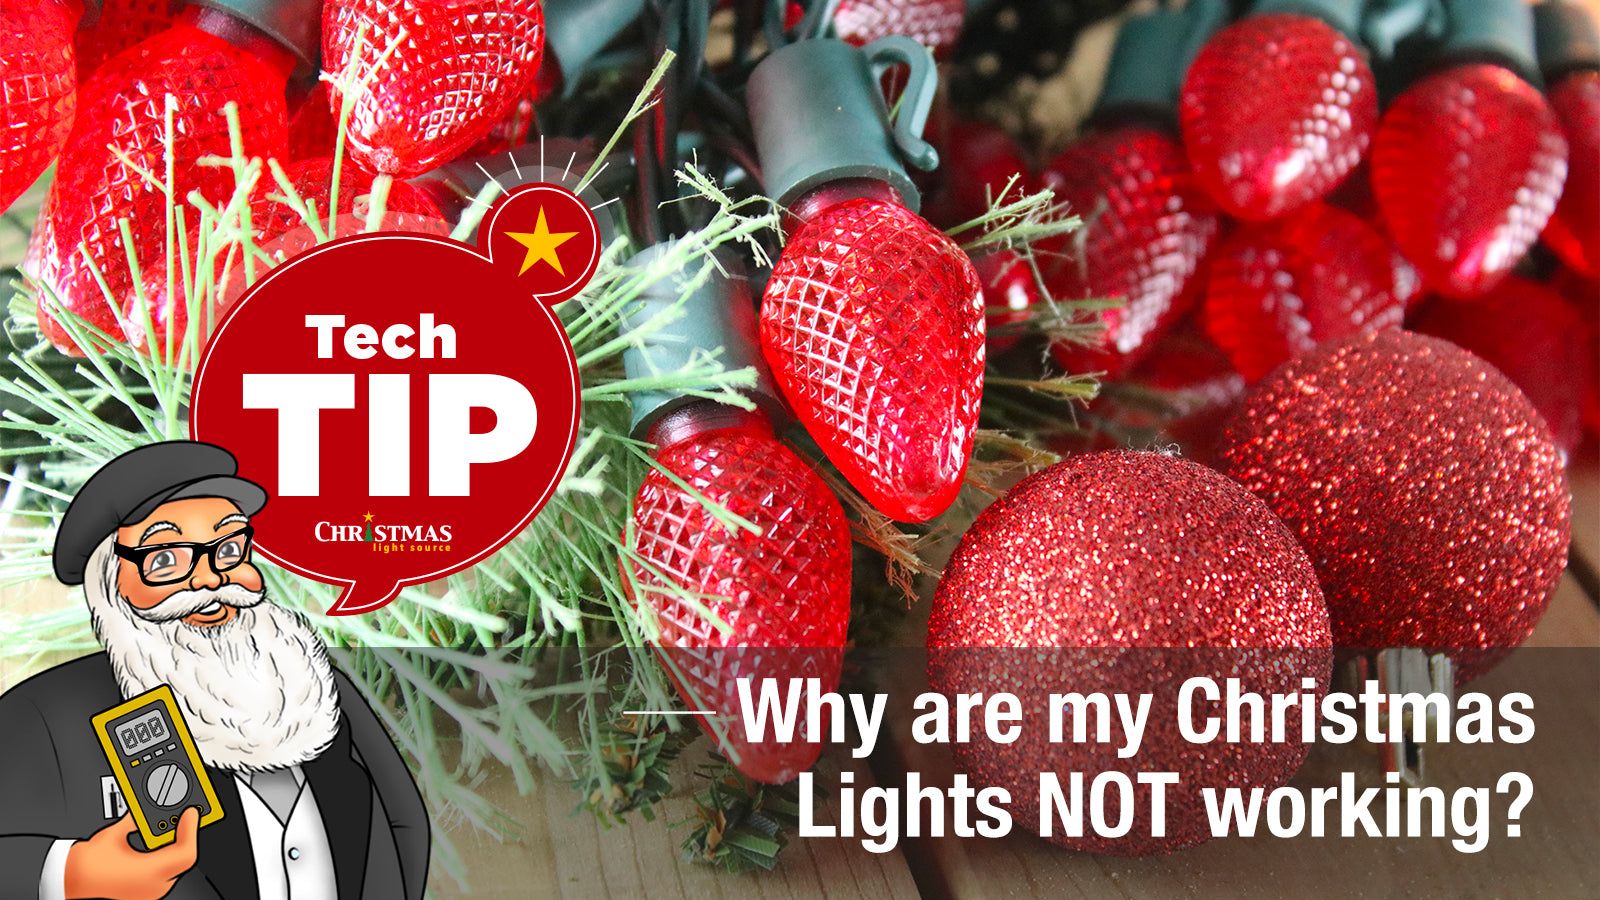 Why are my Christmas lights not working?